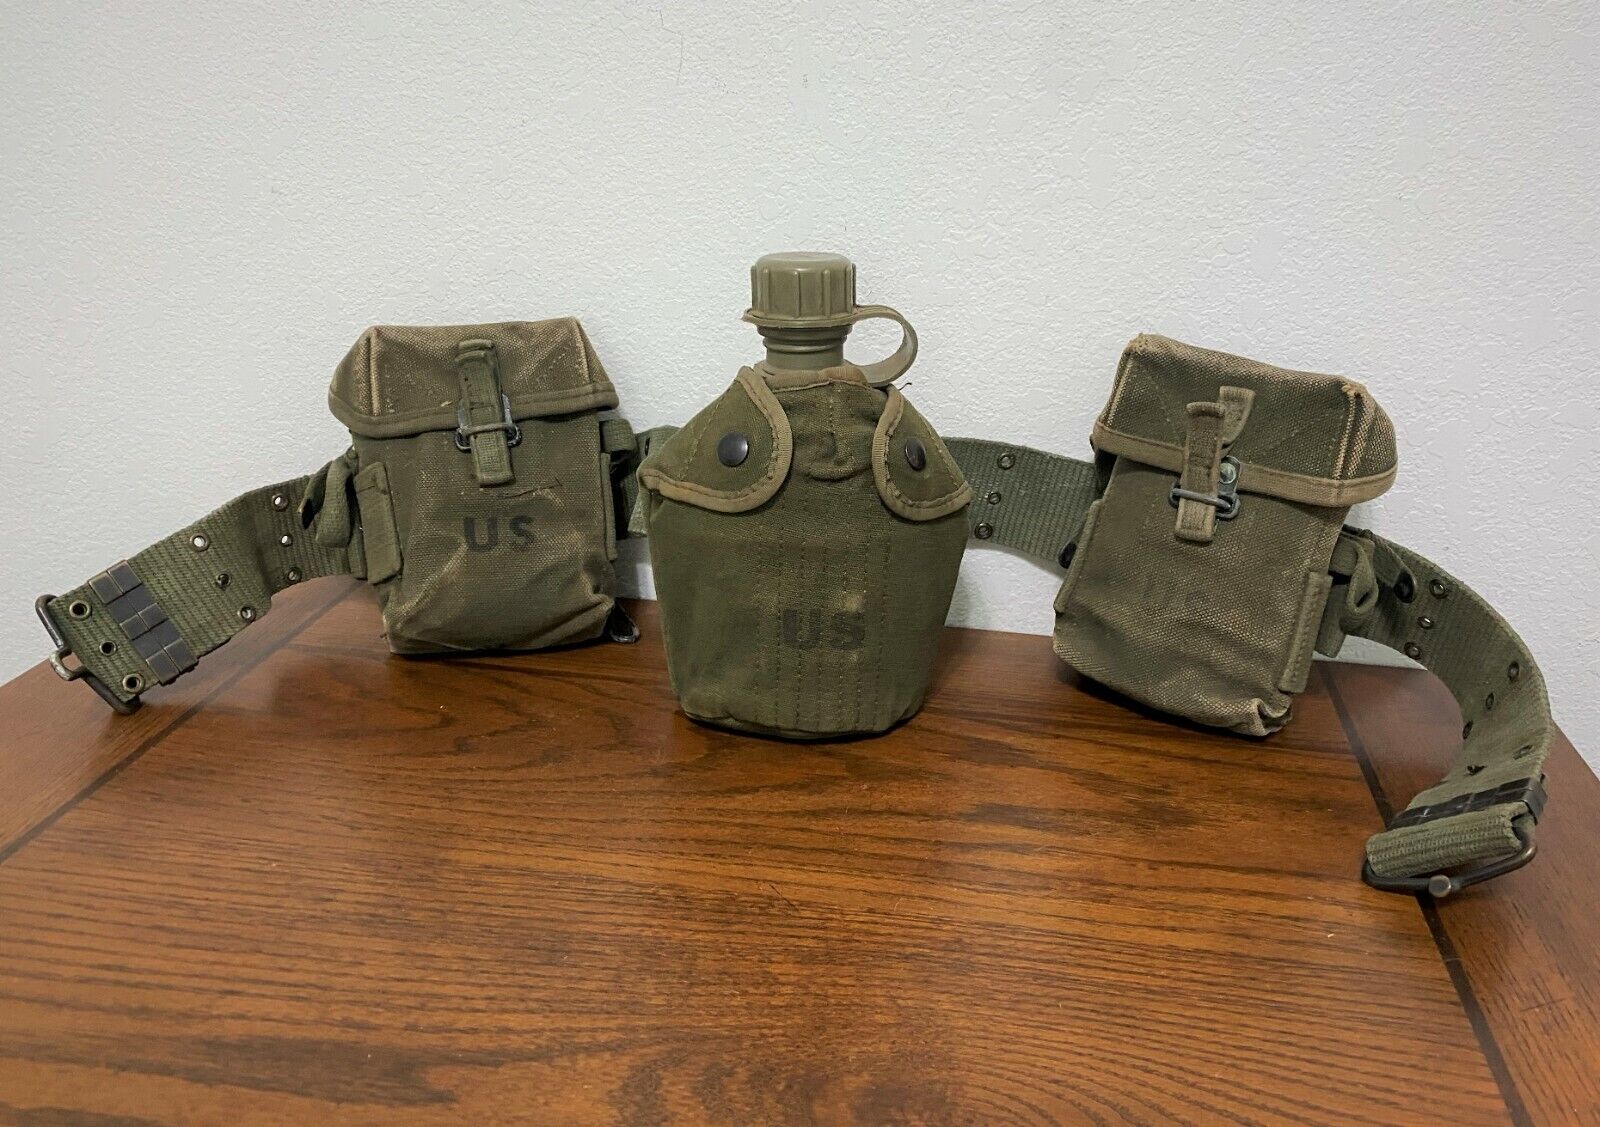 Original Vietnam Era Us Army Field Gear Canteen And Ammo Pouches And Belt